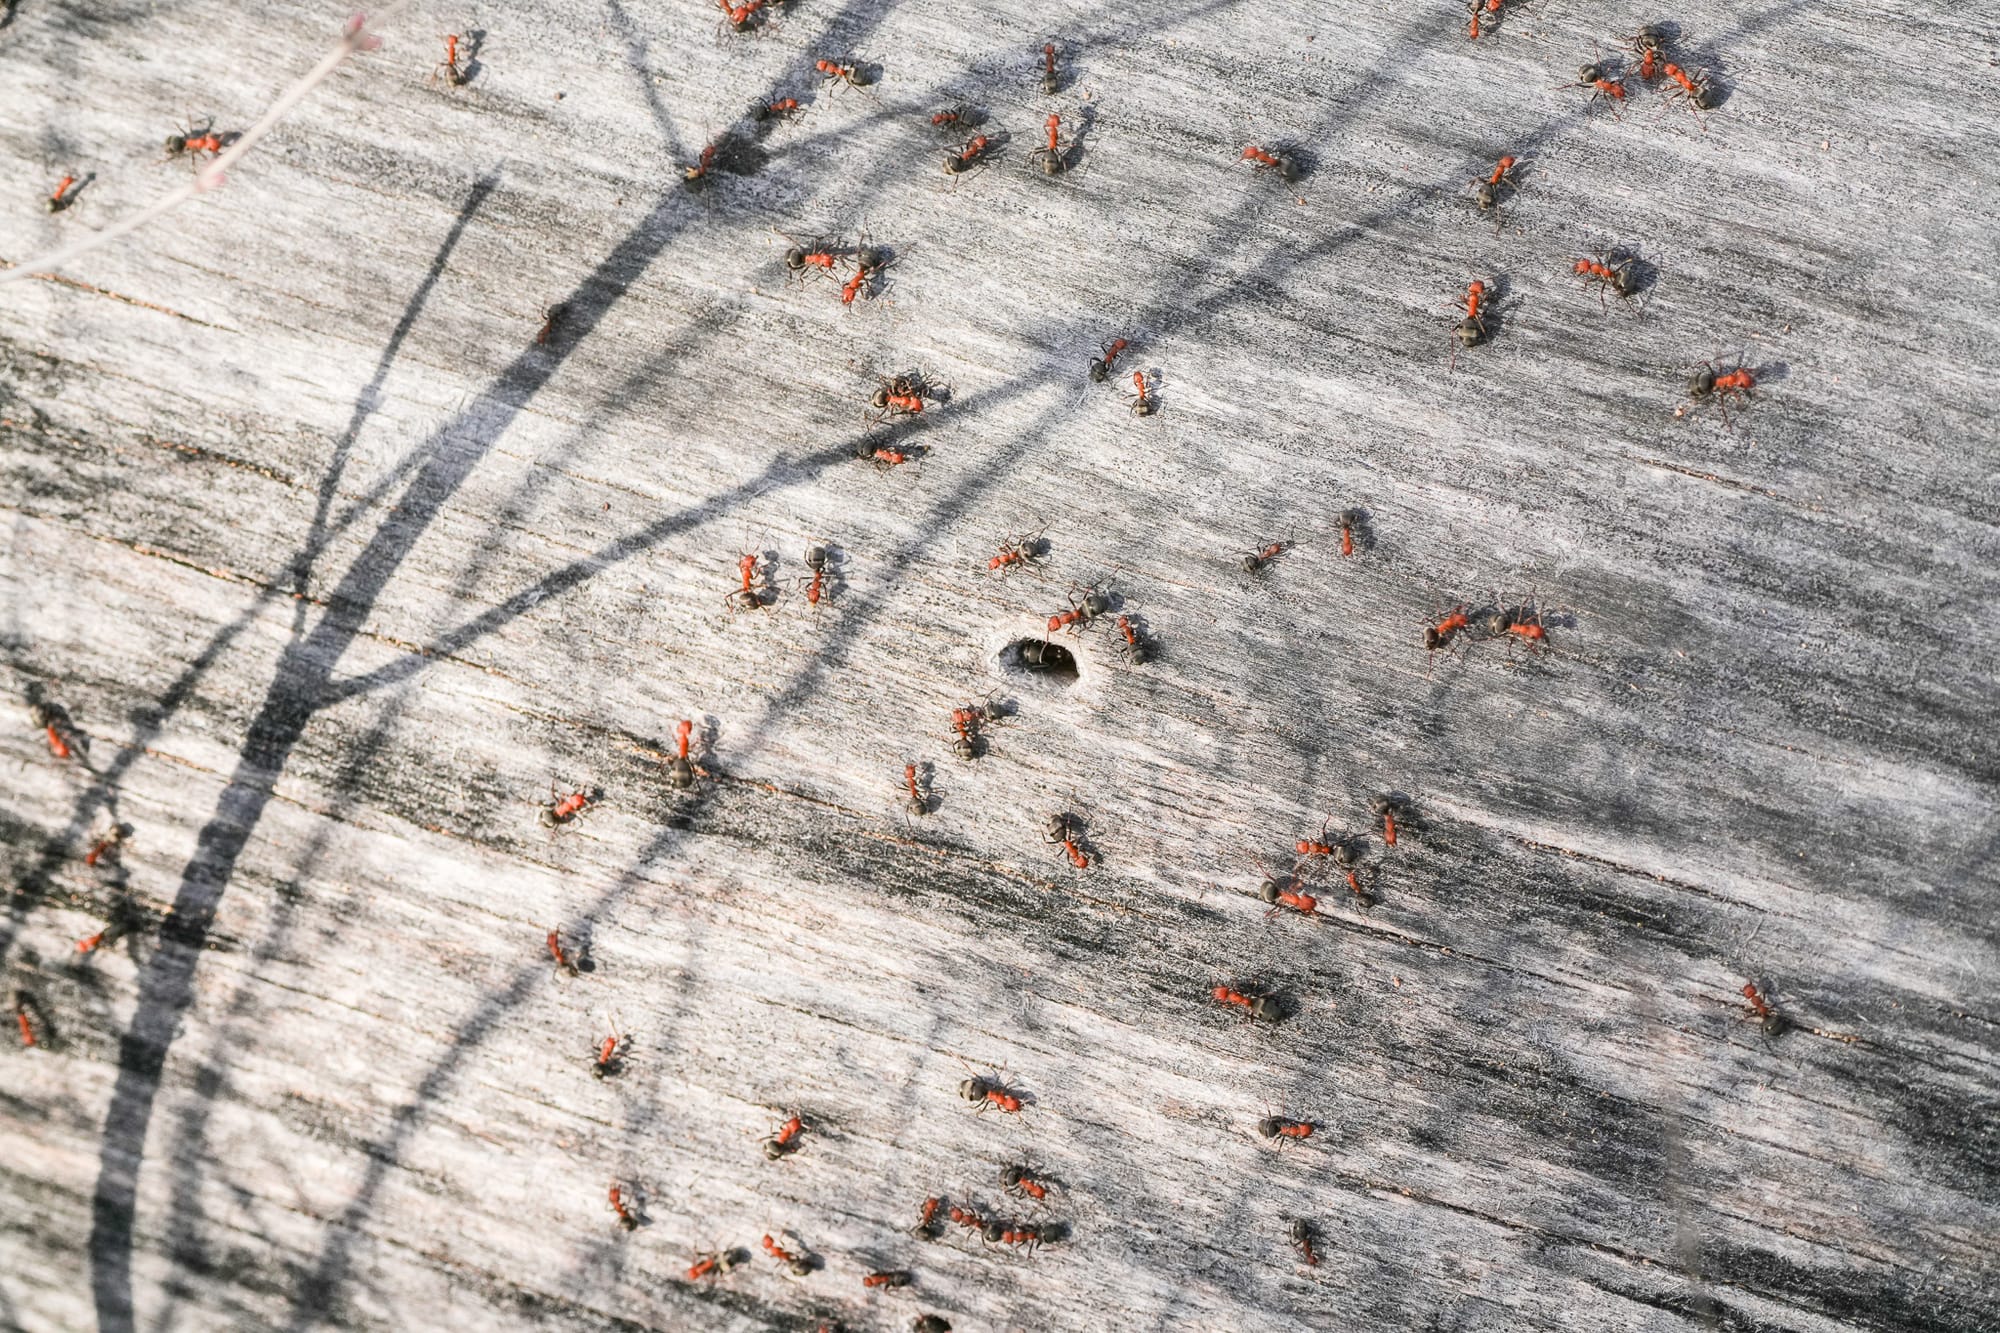 western thatching ants